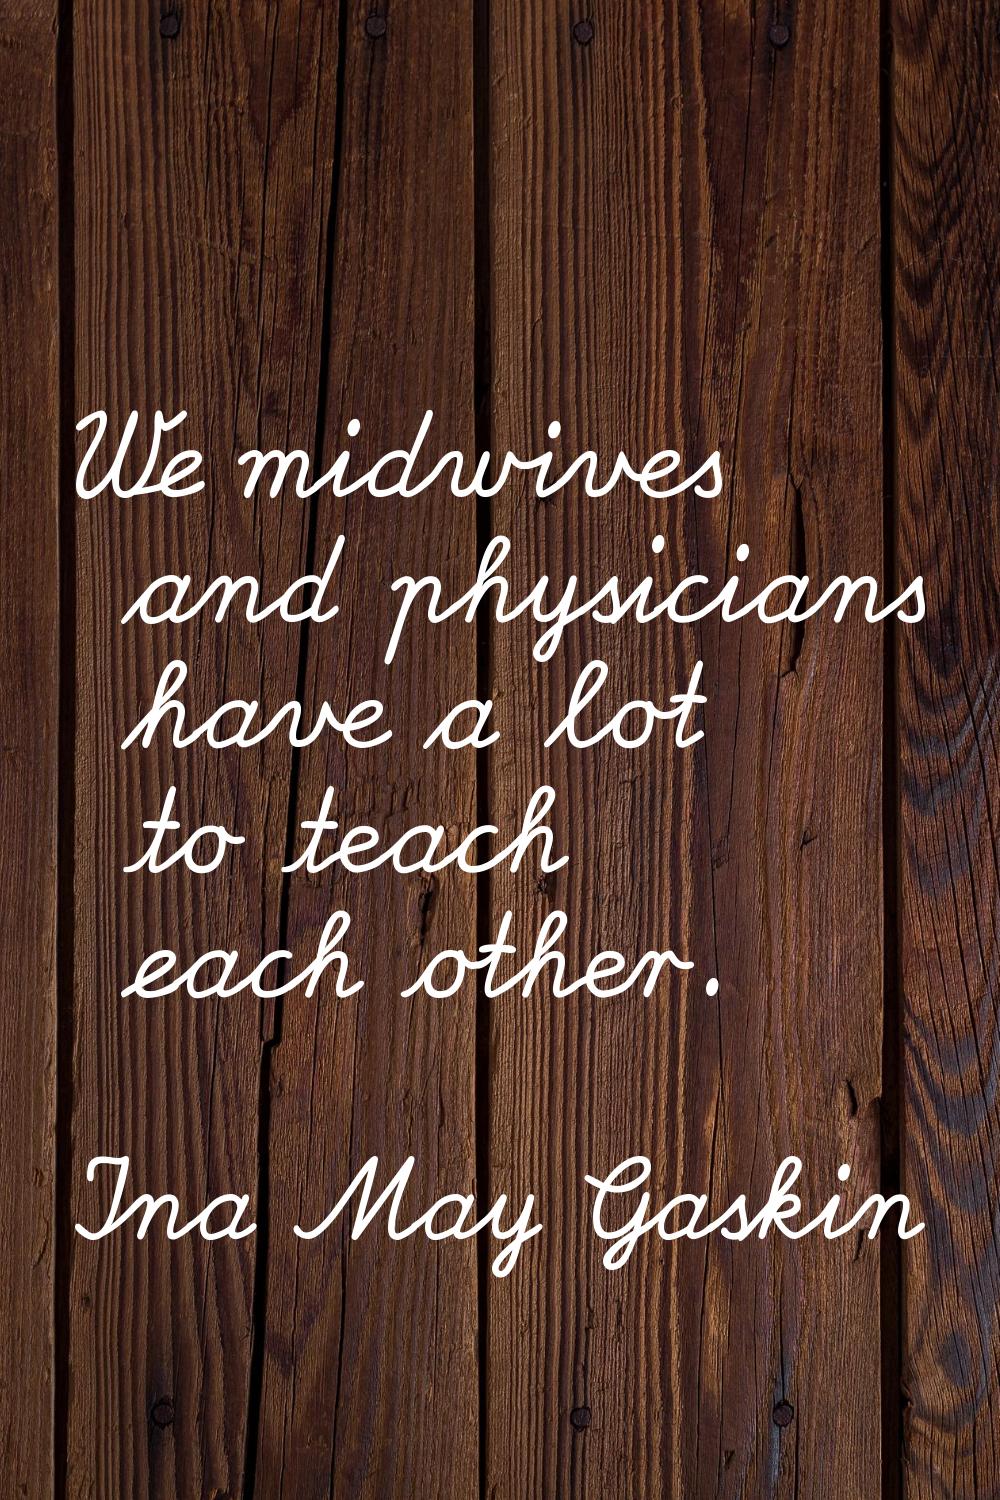 We midwives and physicians have a lot to teach each other.